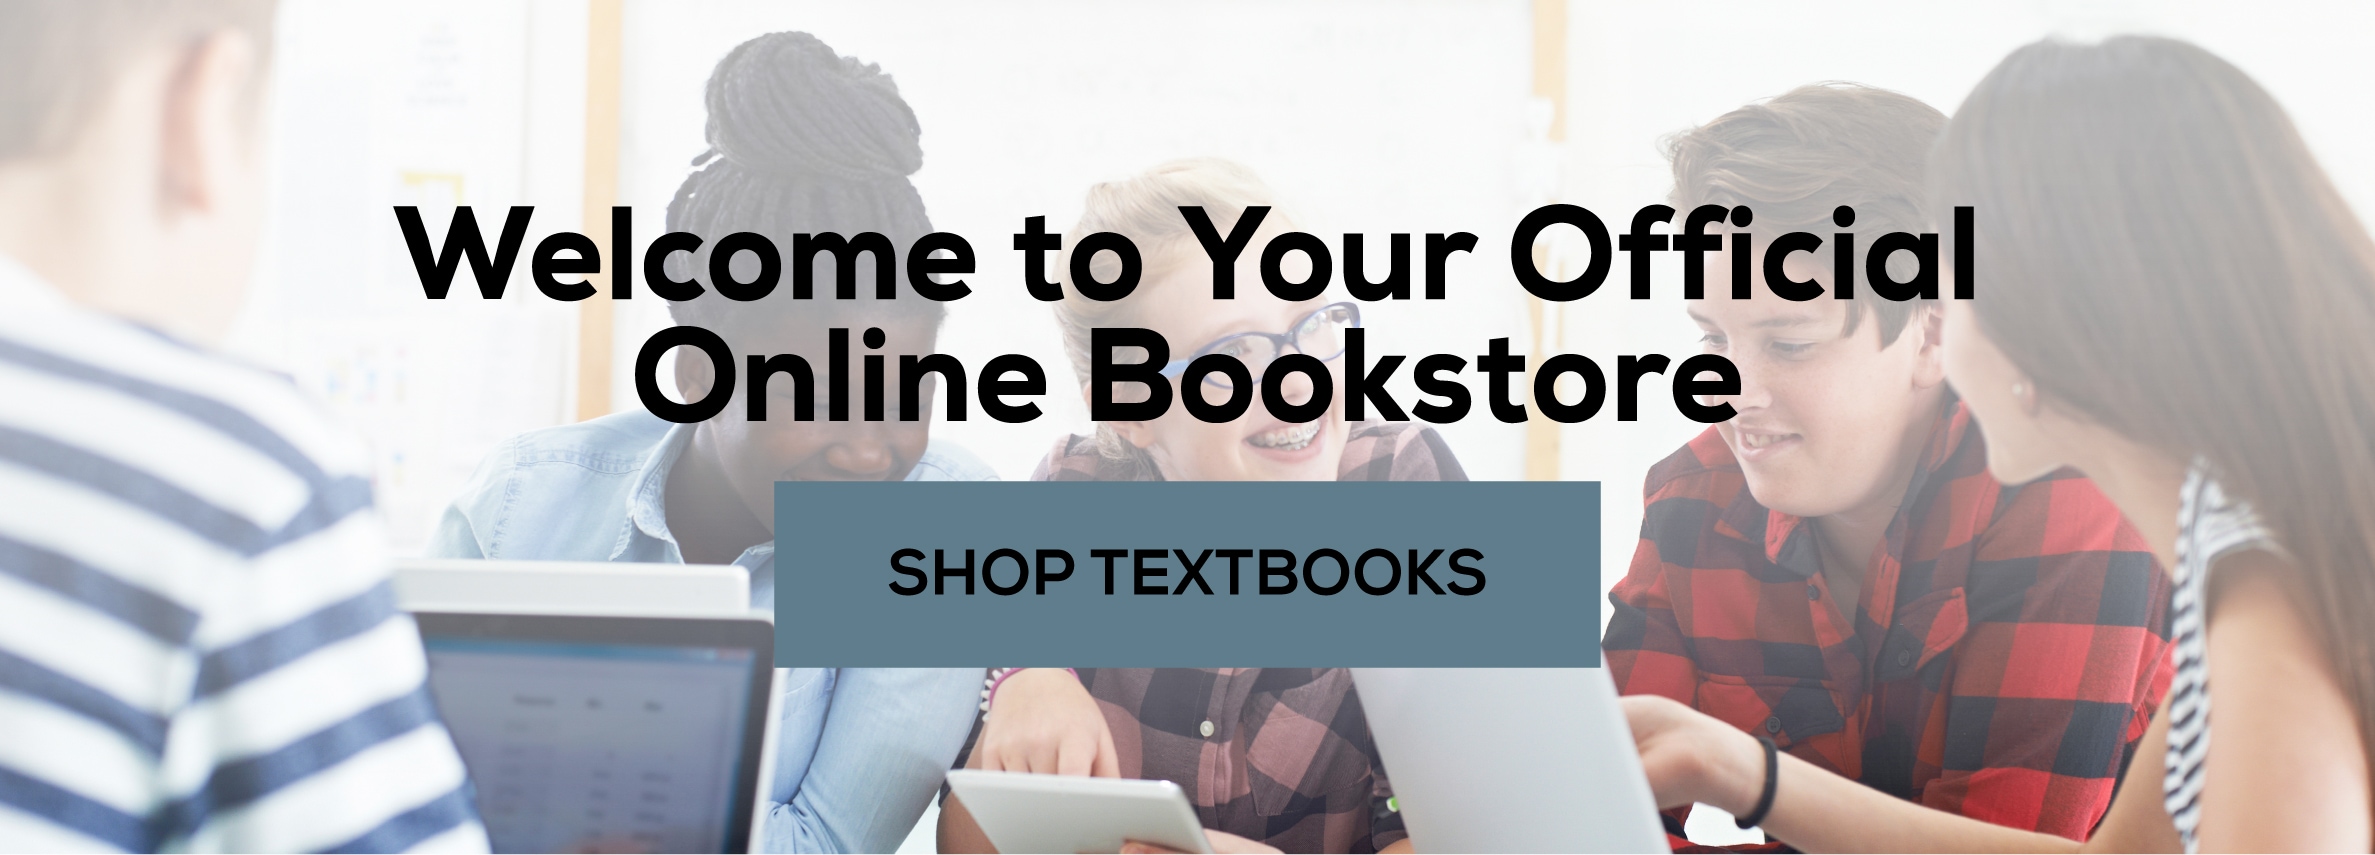 Welcome to your official online bookstore. Shop textbooks.					